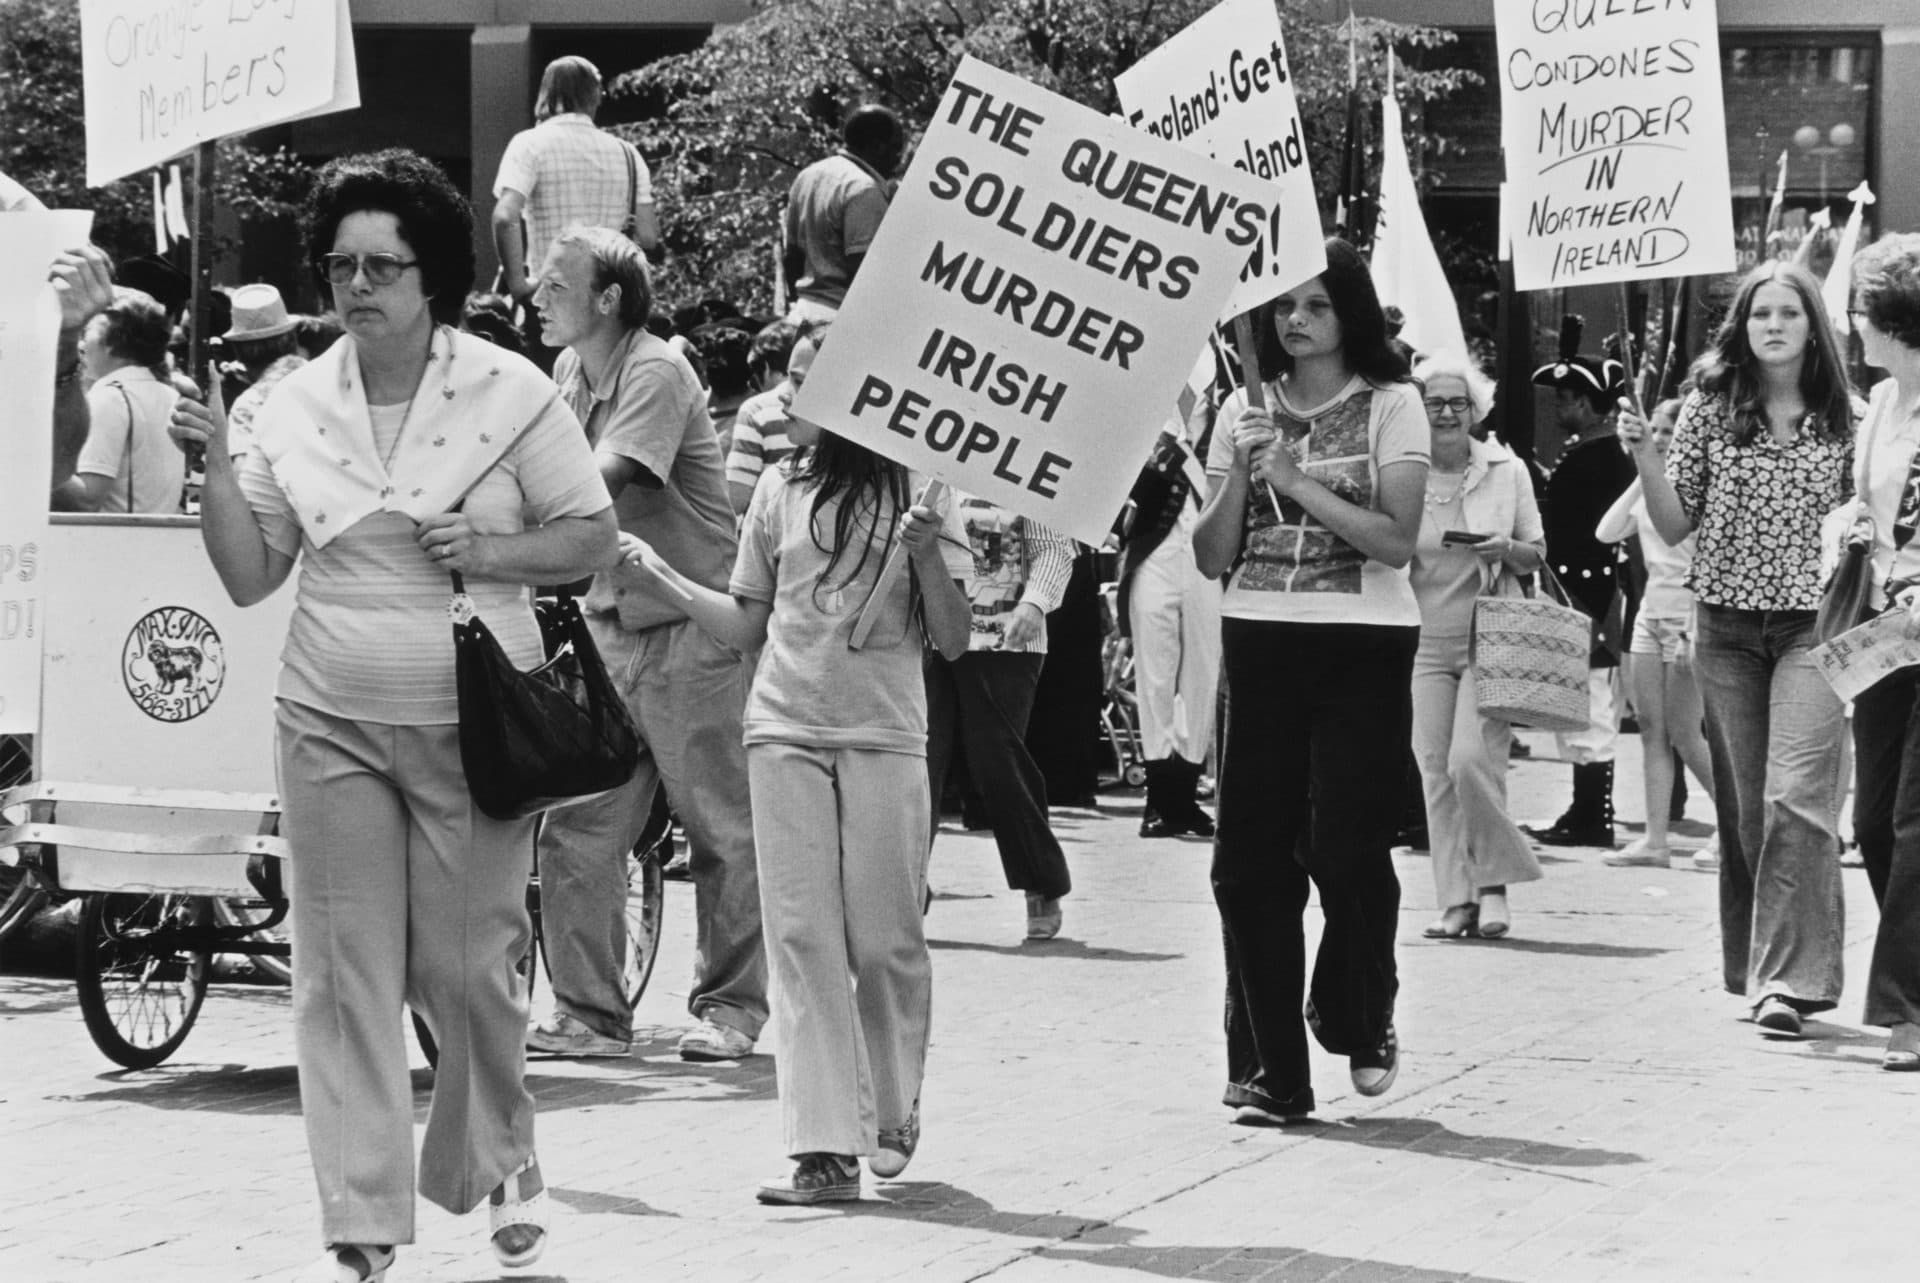 A demonstration in Boston during the United States Bicentennial, commemorating American independence. Queen Elizabeth II is in the U.S. to take part in the celebrations, and these protestors are condemning the role of Britain in Northern Ireland. (Barbara Alper/Getty Images)